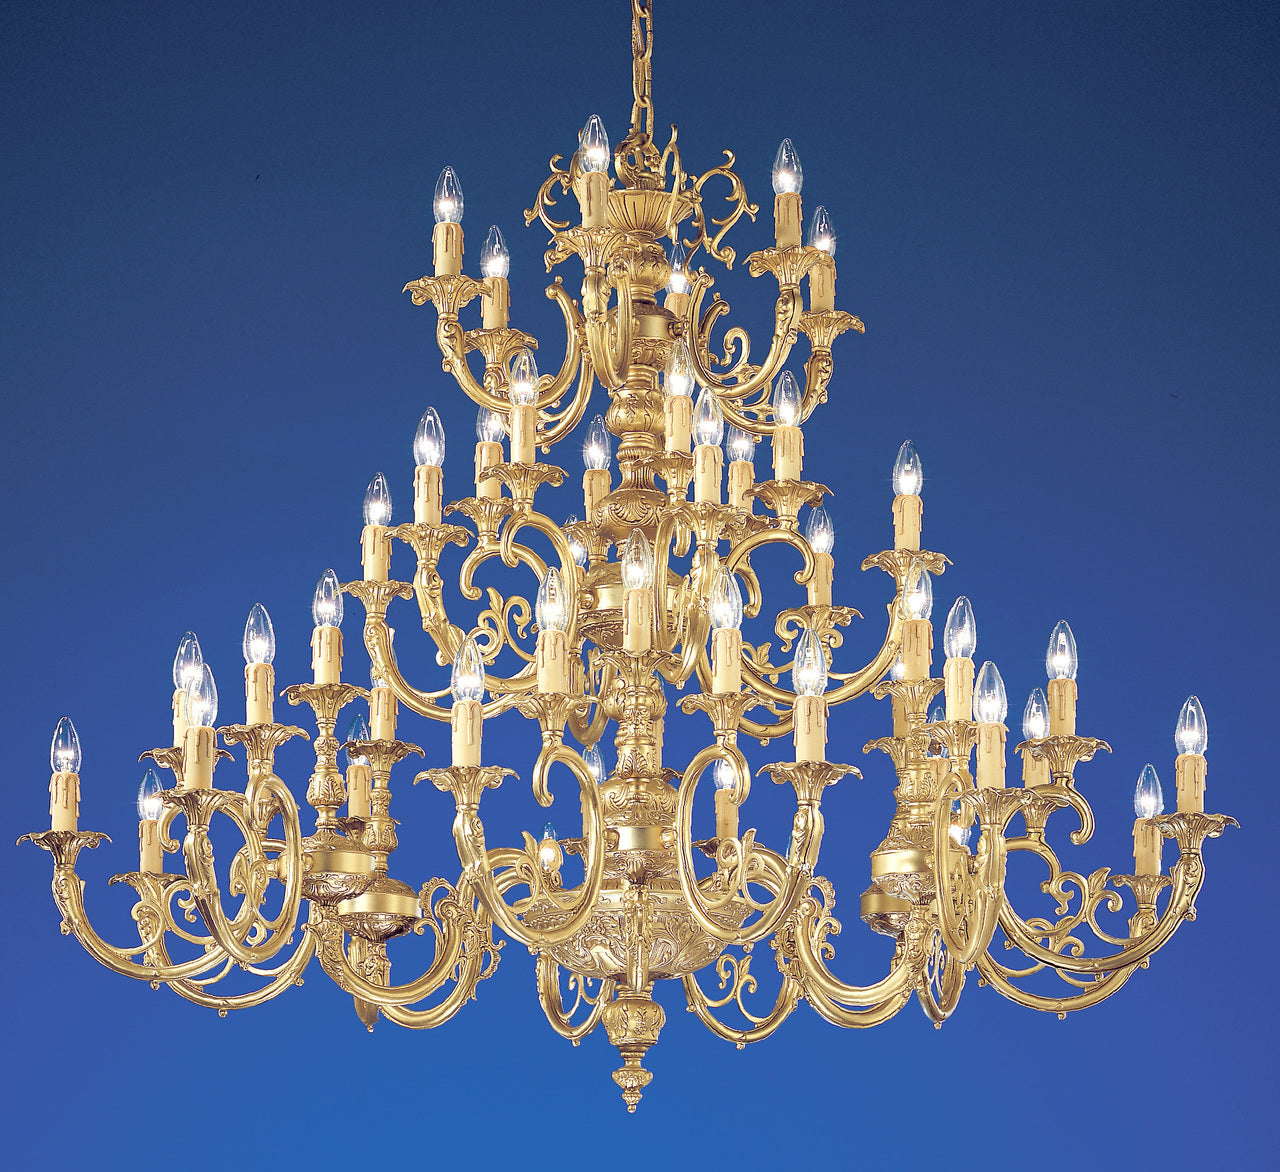 Classic Lighting 5748 SBB S Princeton Crystal/Cast Brass Chandelier in Satin Bronze/Brown Patina (Imported from Spain)